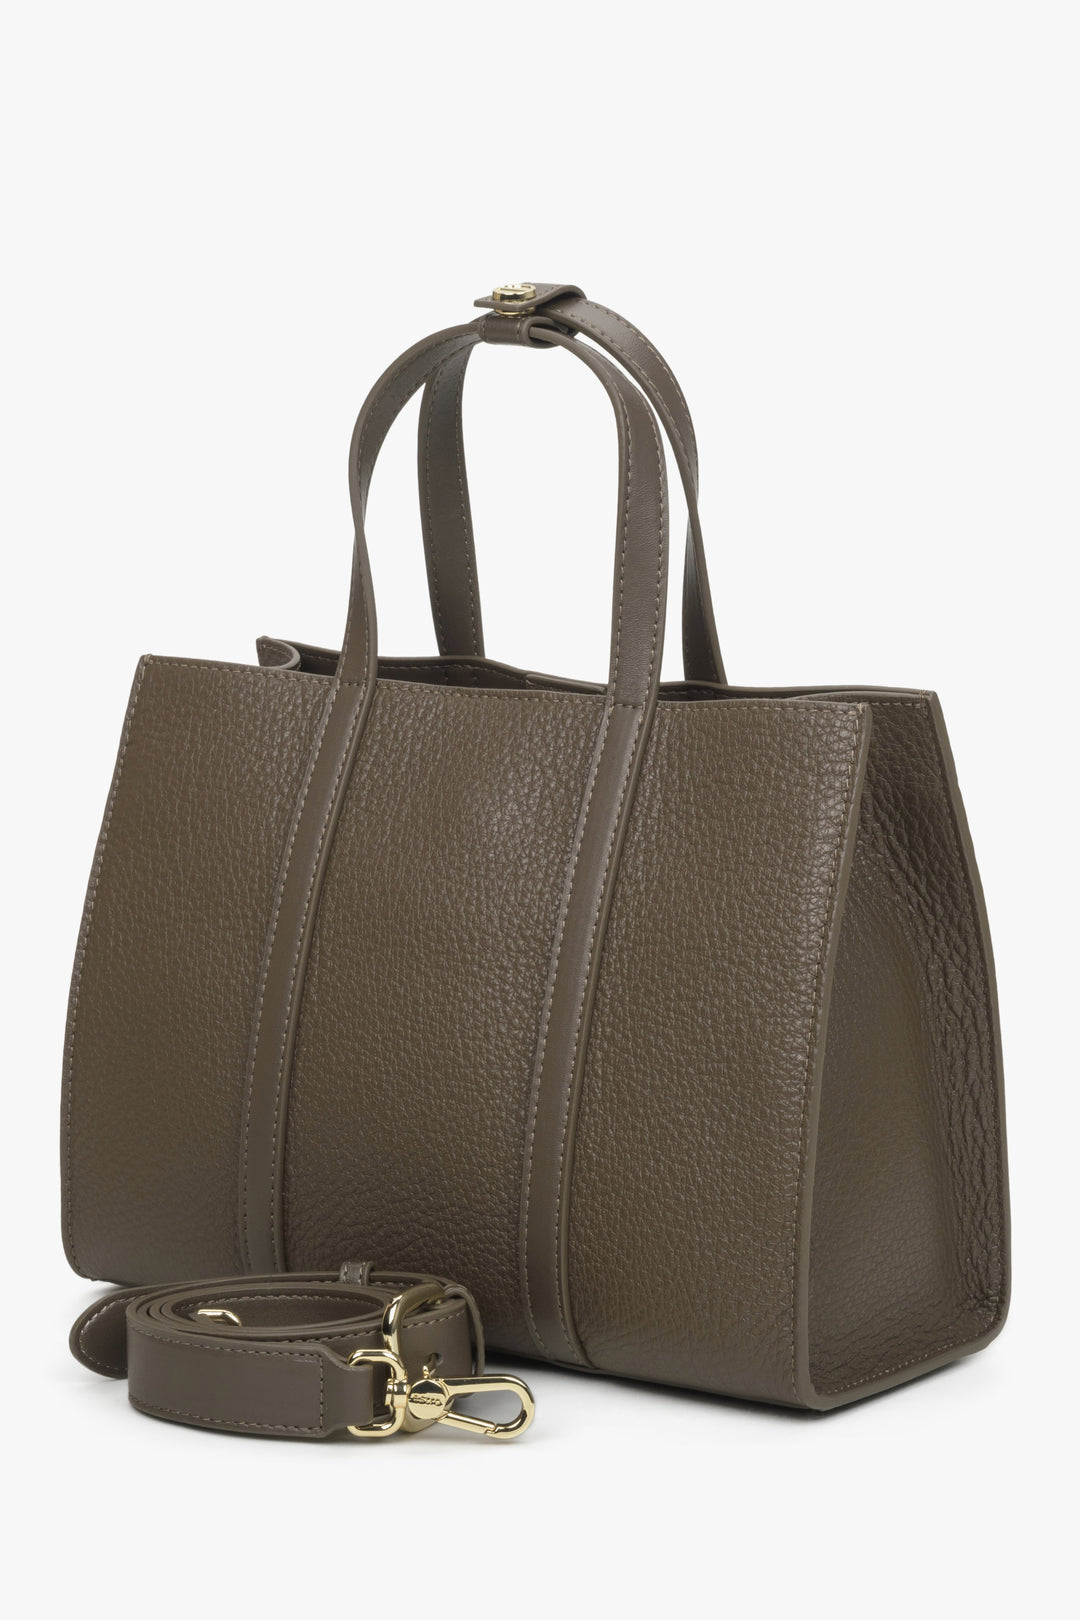 Women's brown shopper bag made of genuine leather by Estro.